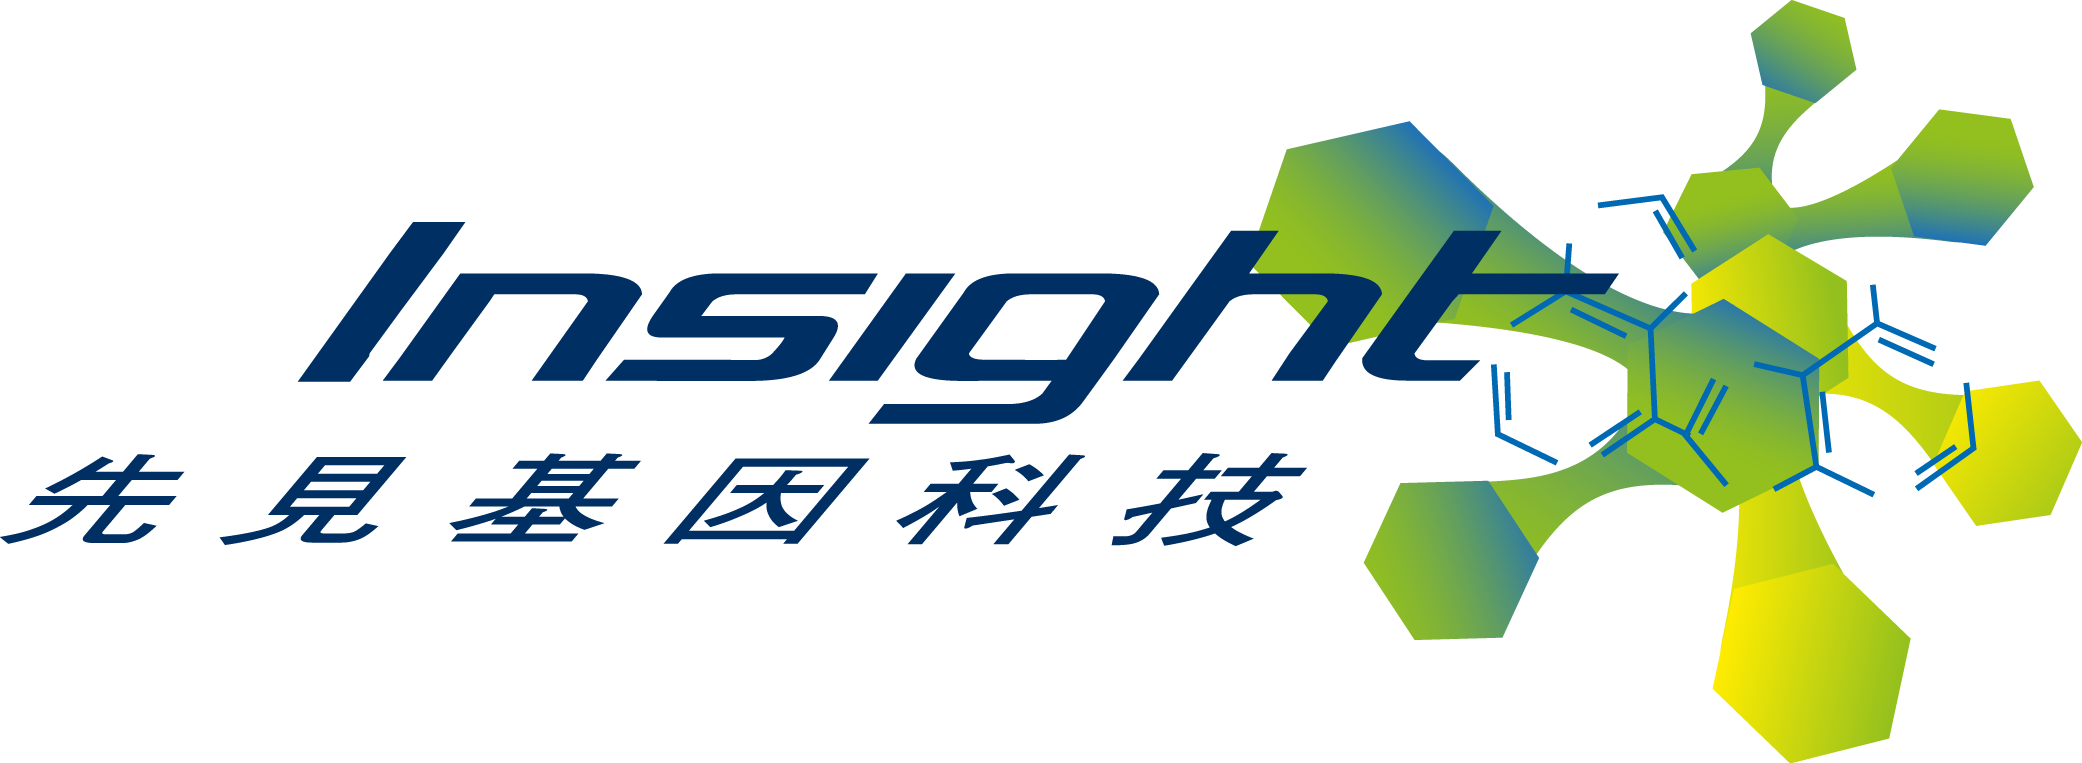 insight logo.png